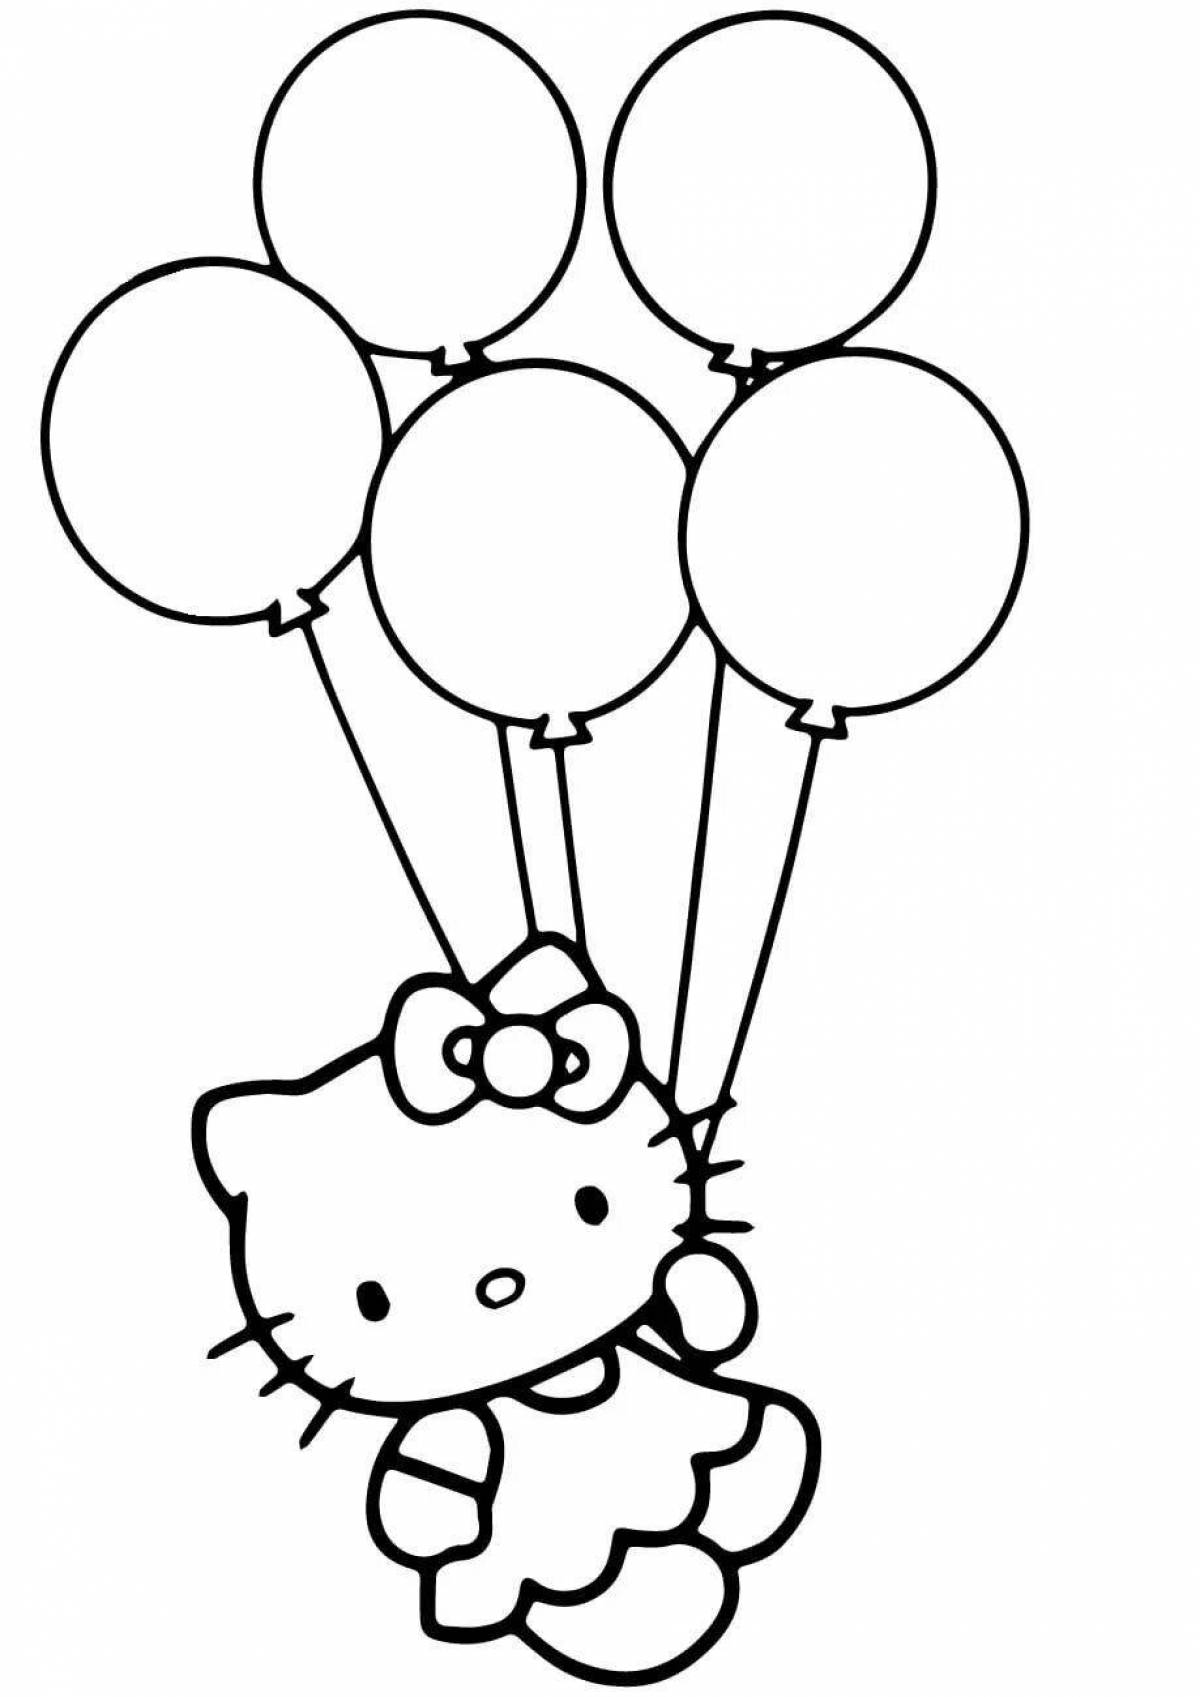 Color-mania balloons coloring page for children 3-4 years old